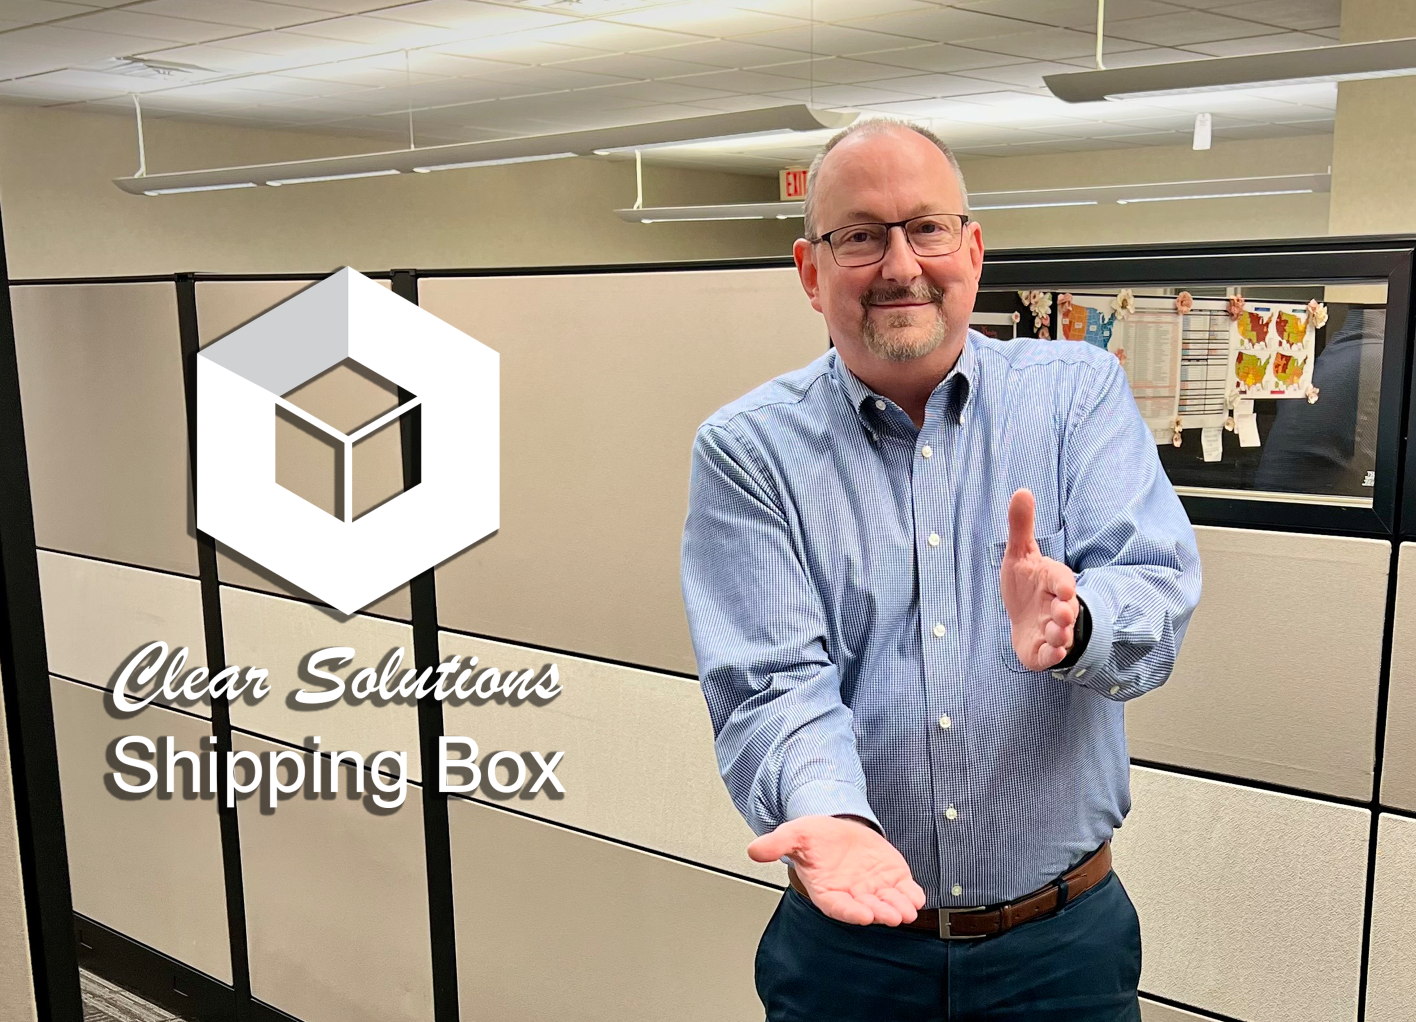 Clear Solutions Shipping Box